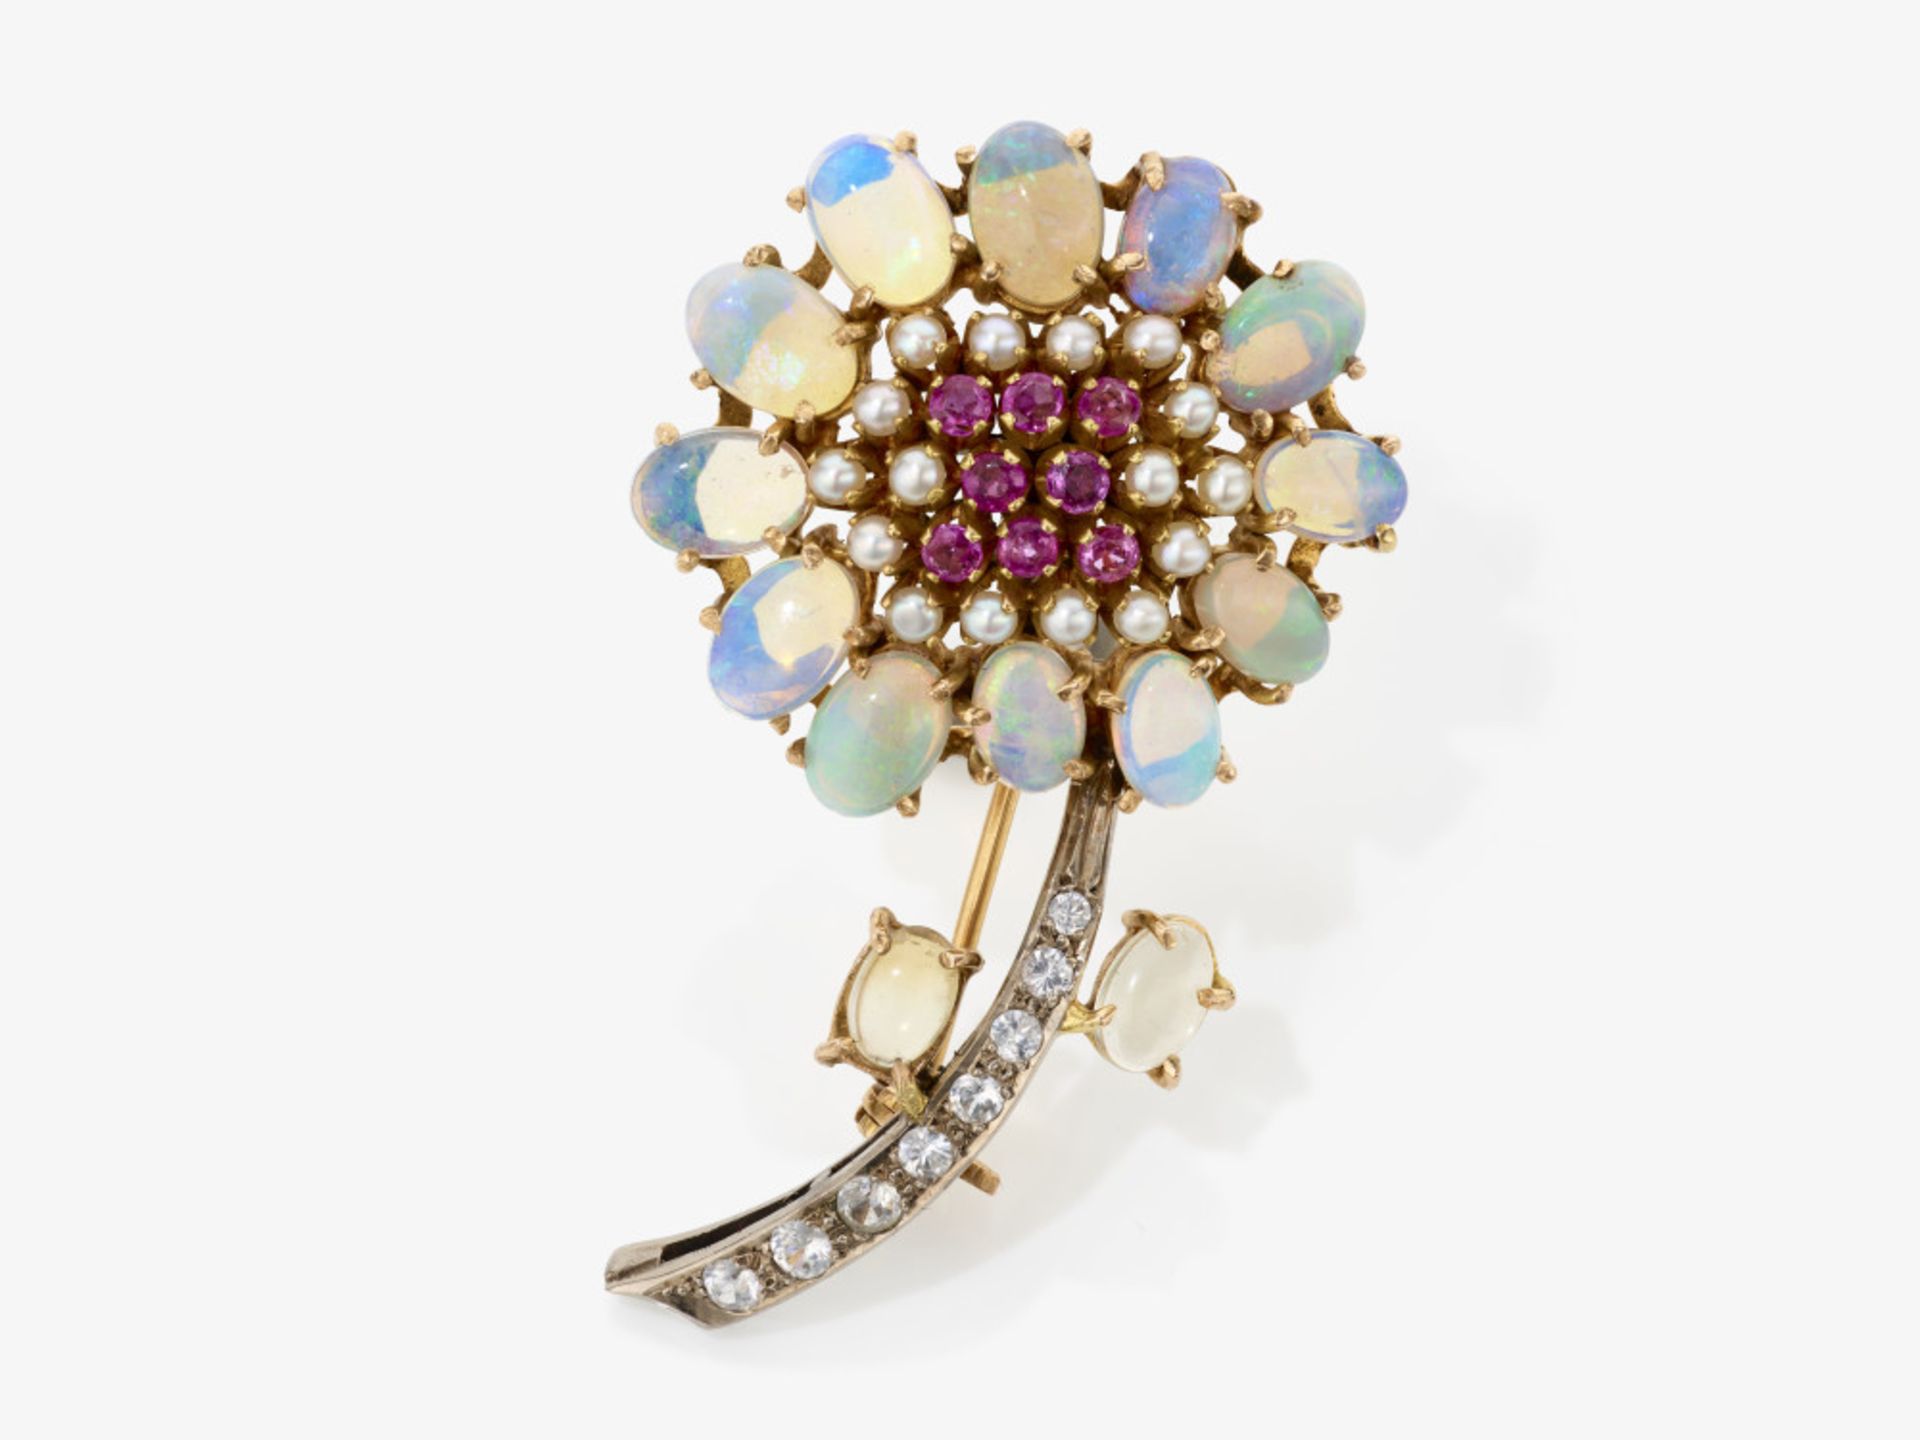 A flower brooch with opals, rubies, sapphires and seed pearls - Image 2 of 2